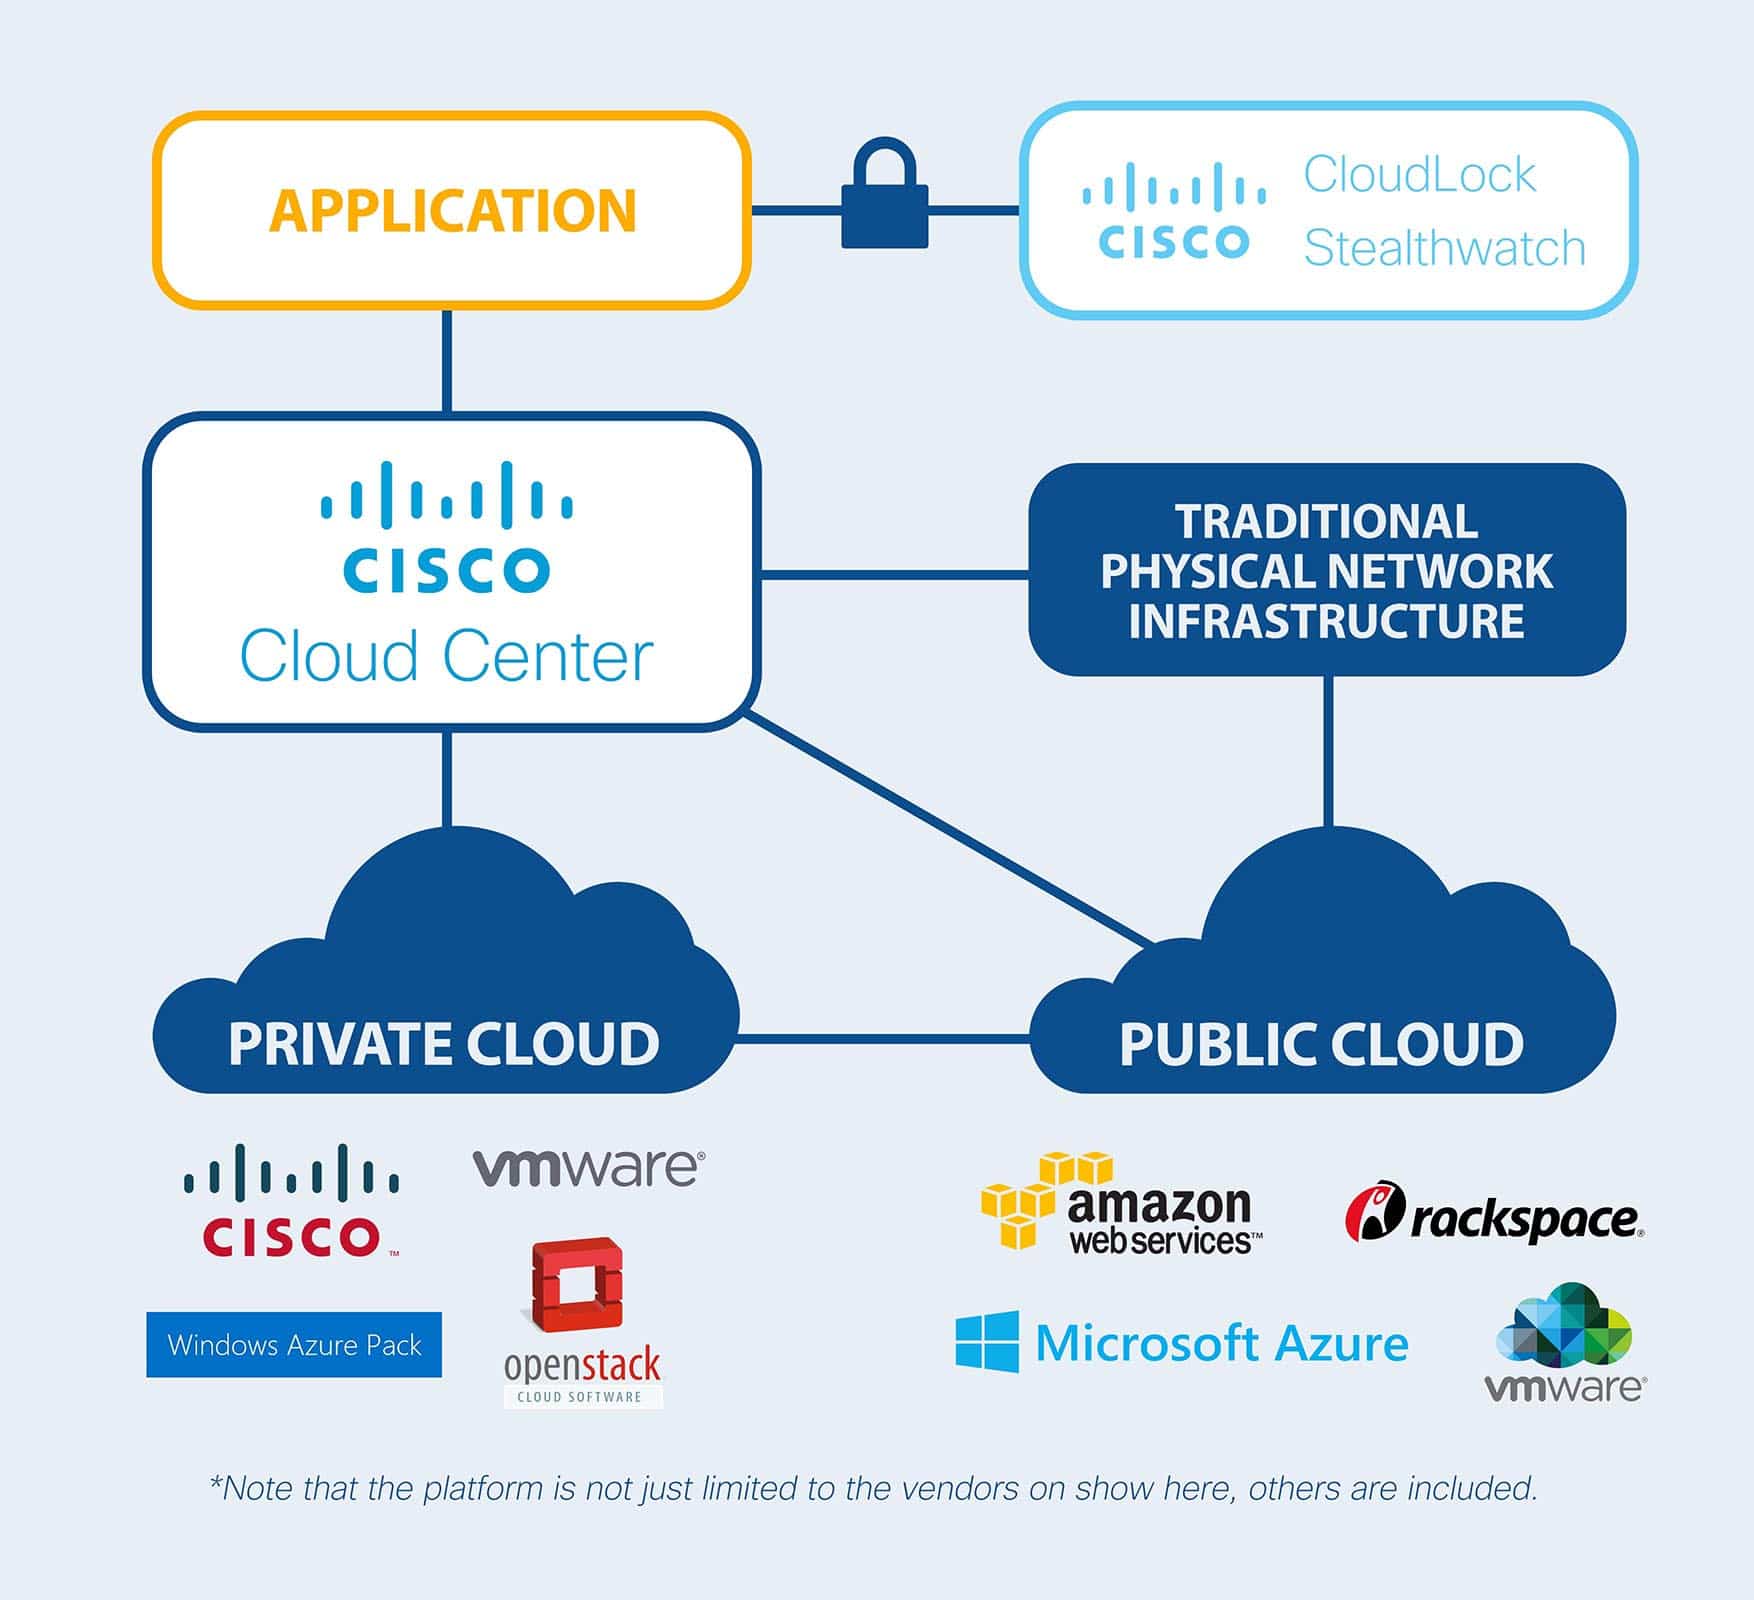 Cloud applications. Облако Циско. Иконки Циско cloud. Иконки Циско облако. Private cloud Architecture for Education.